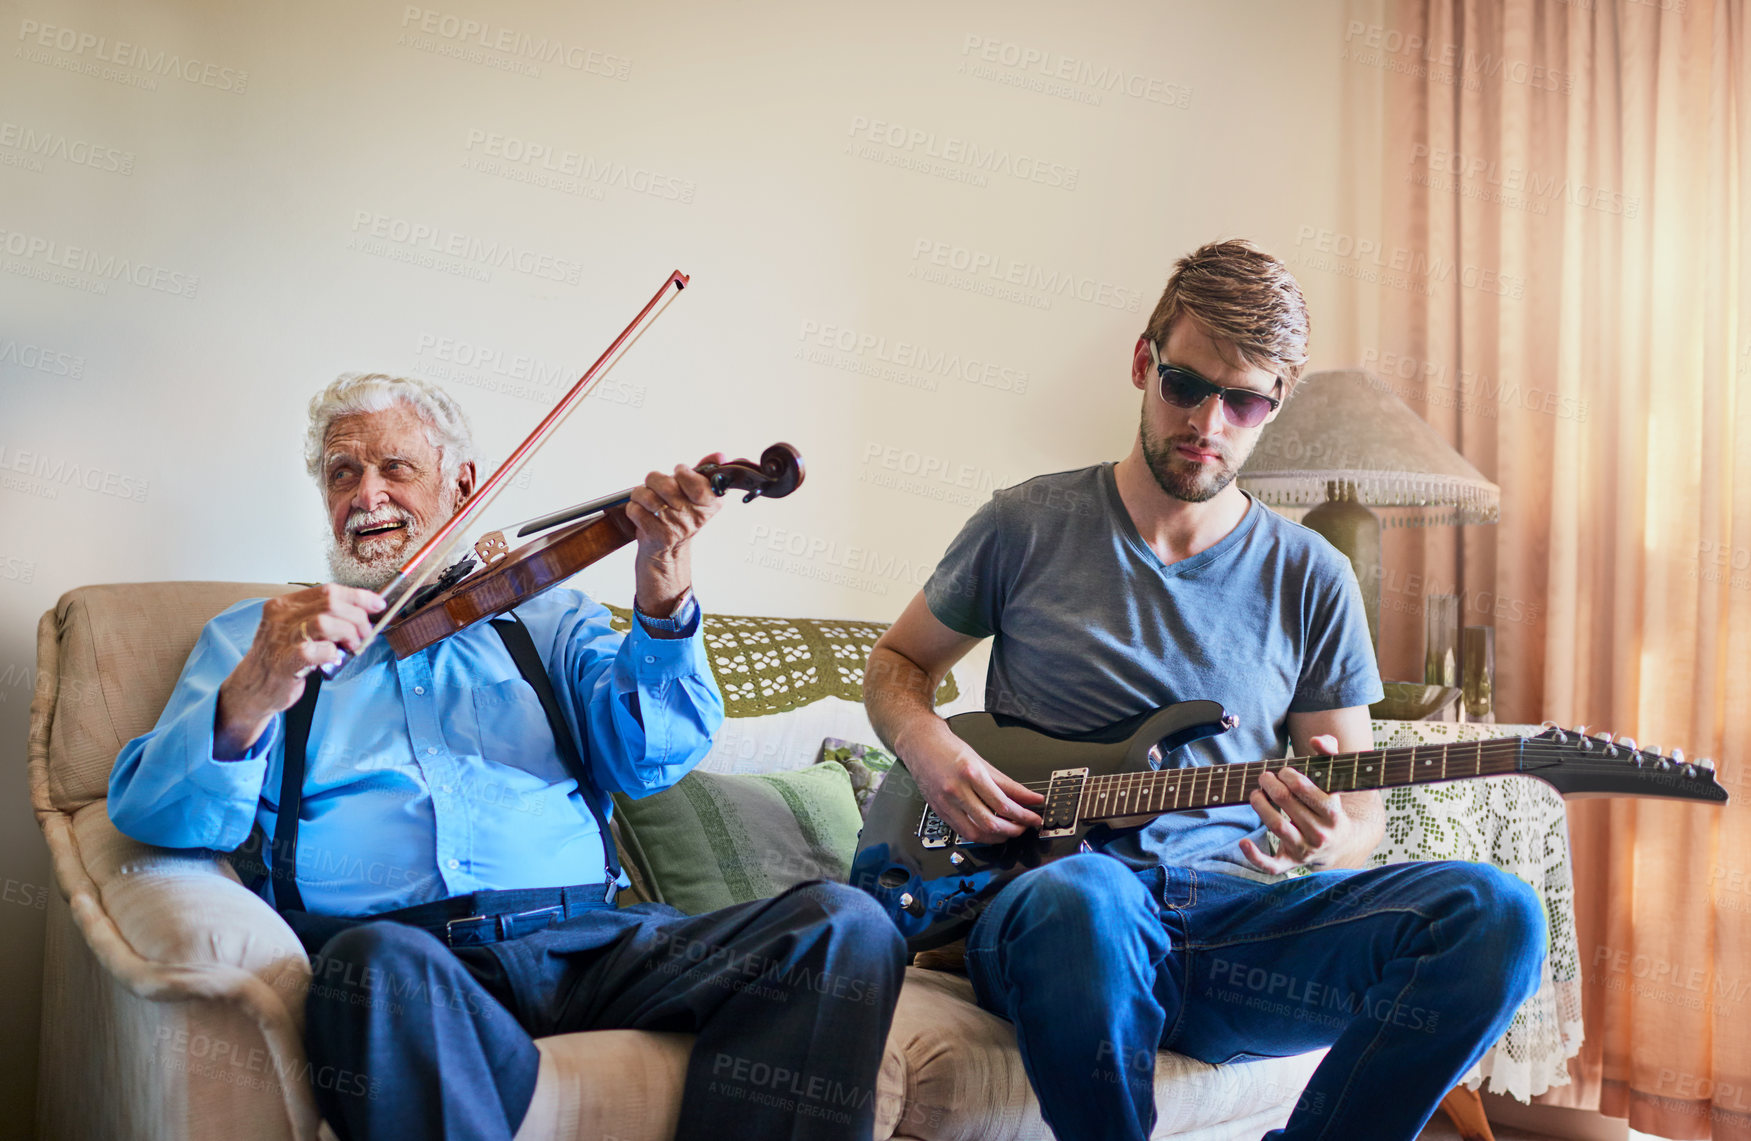 Buy stock photo Shot of a young man playing the electric guitar while his elderly grandfather plays the violin on the couch